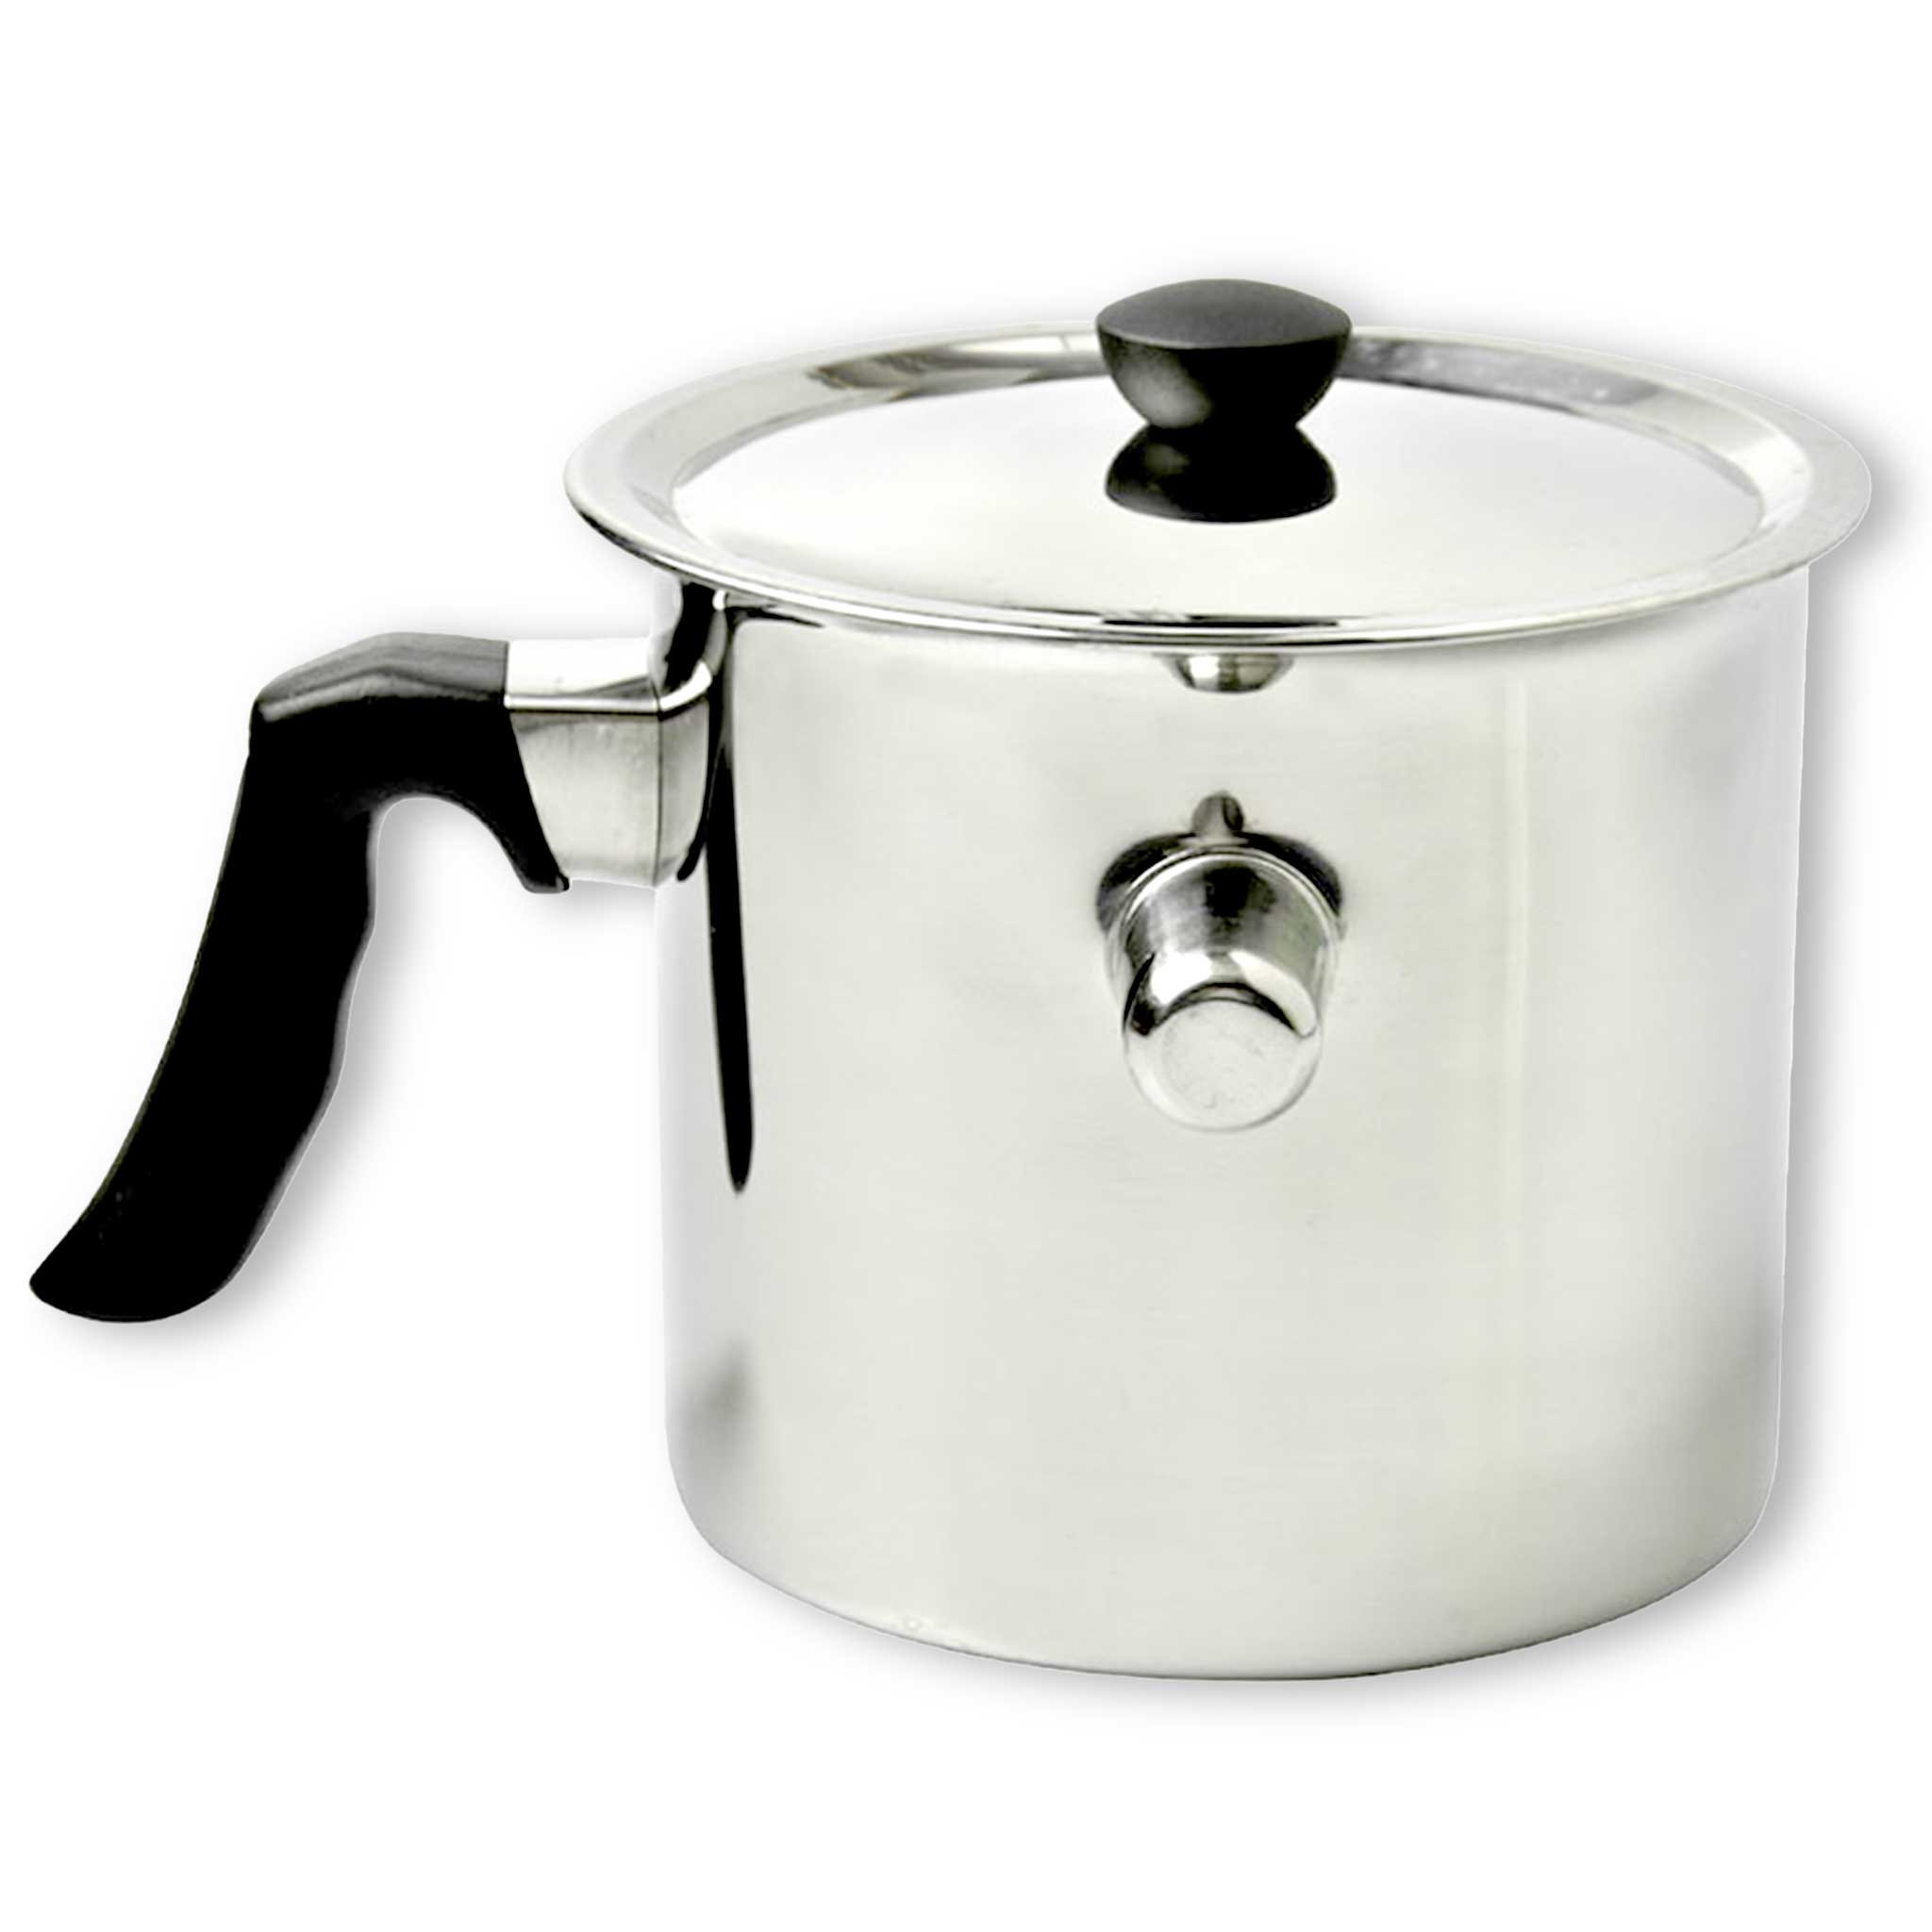 Bees Wax Melter Double Boiler Stainless-steel 2.5L - Processing collection by Buzzbee Beekeeping Supplies